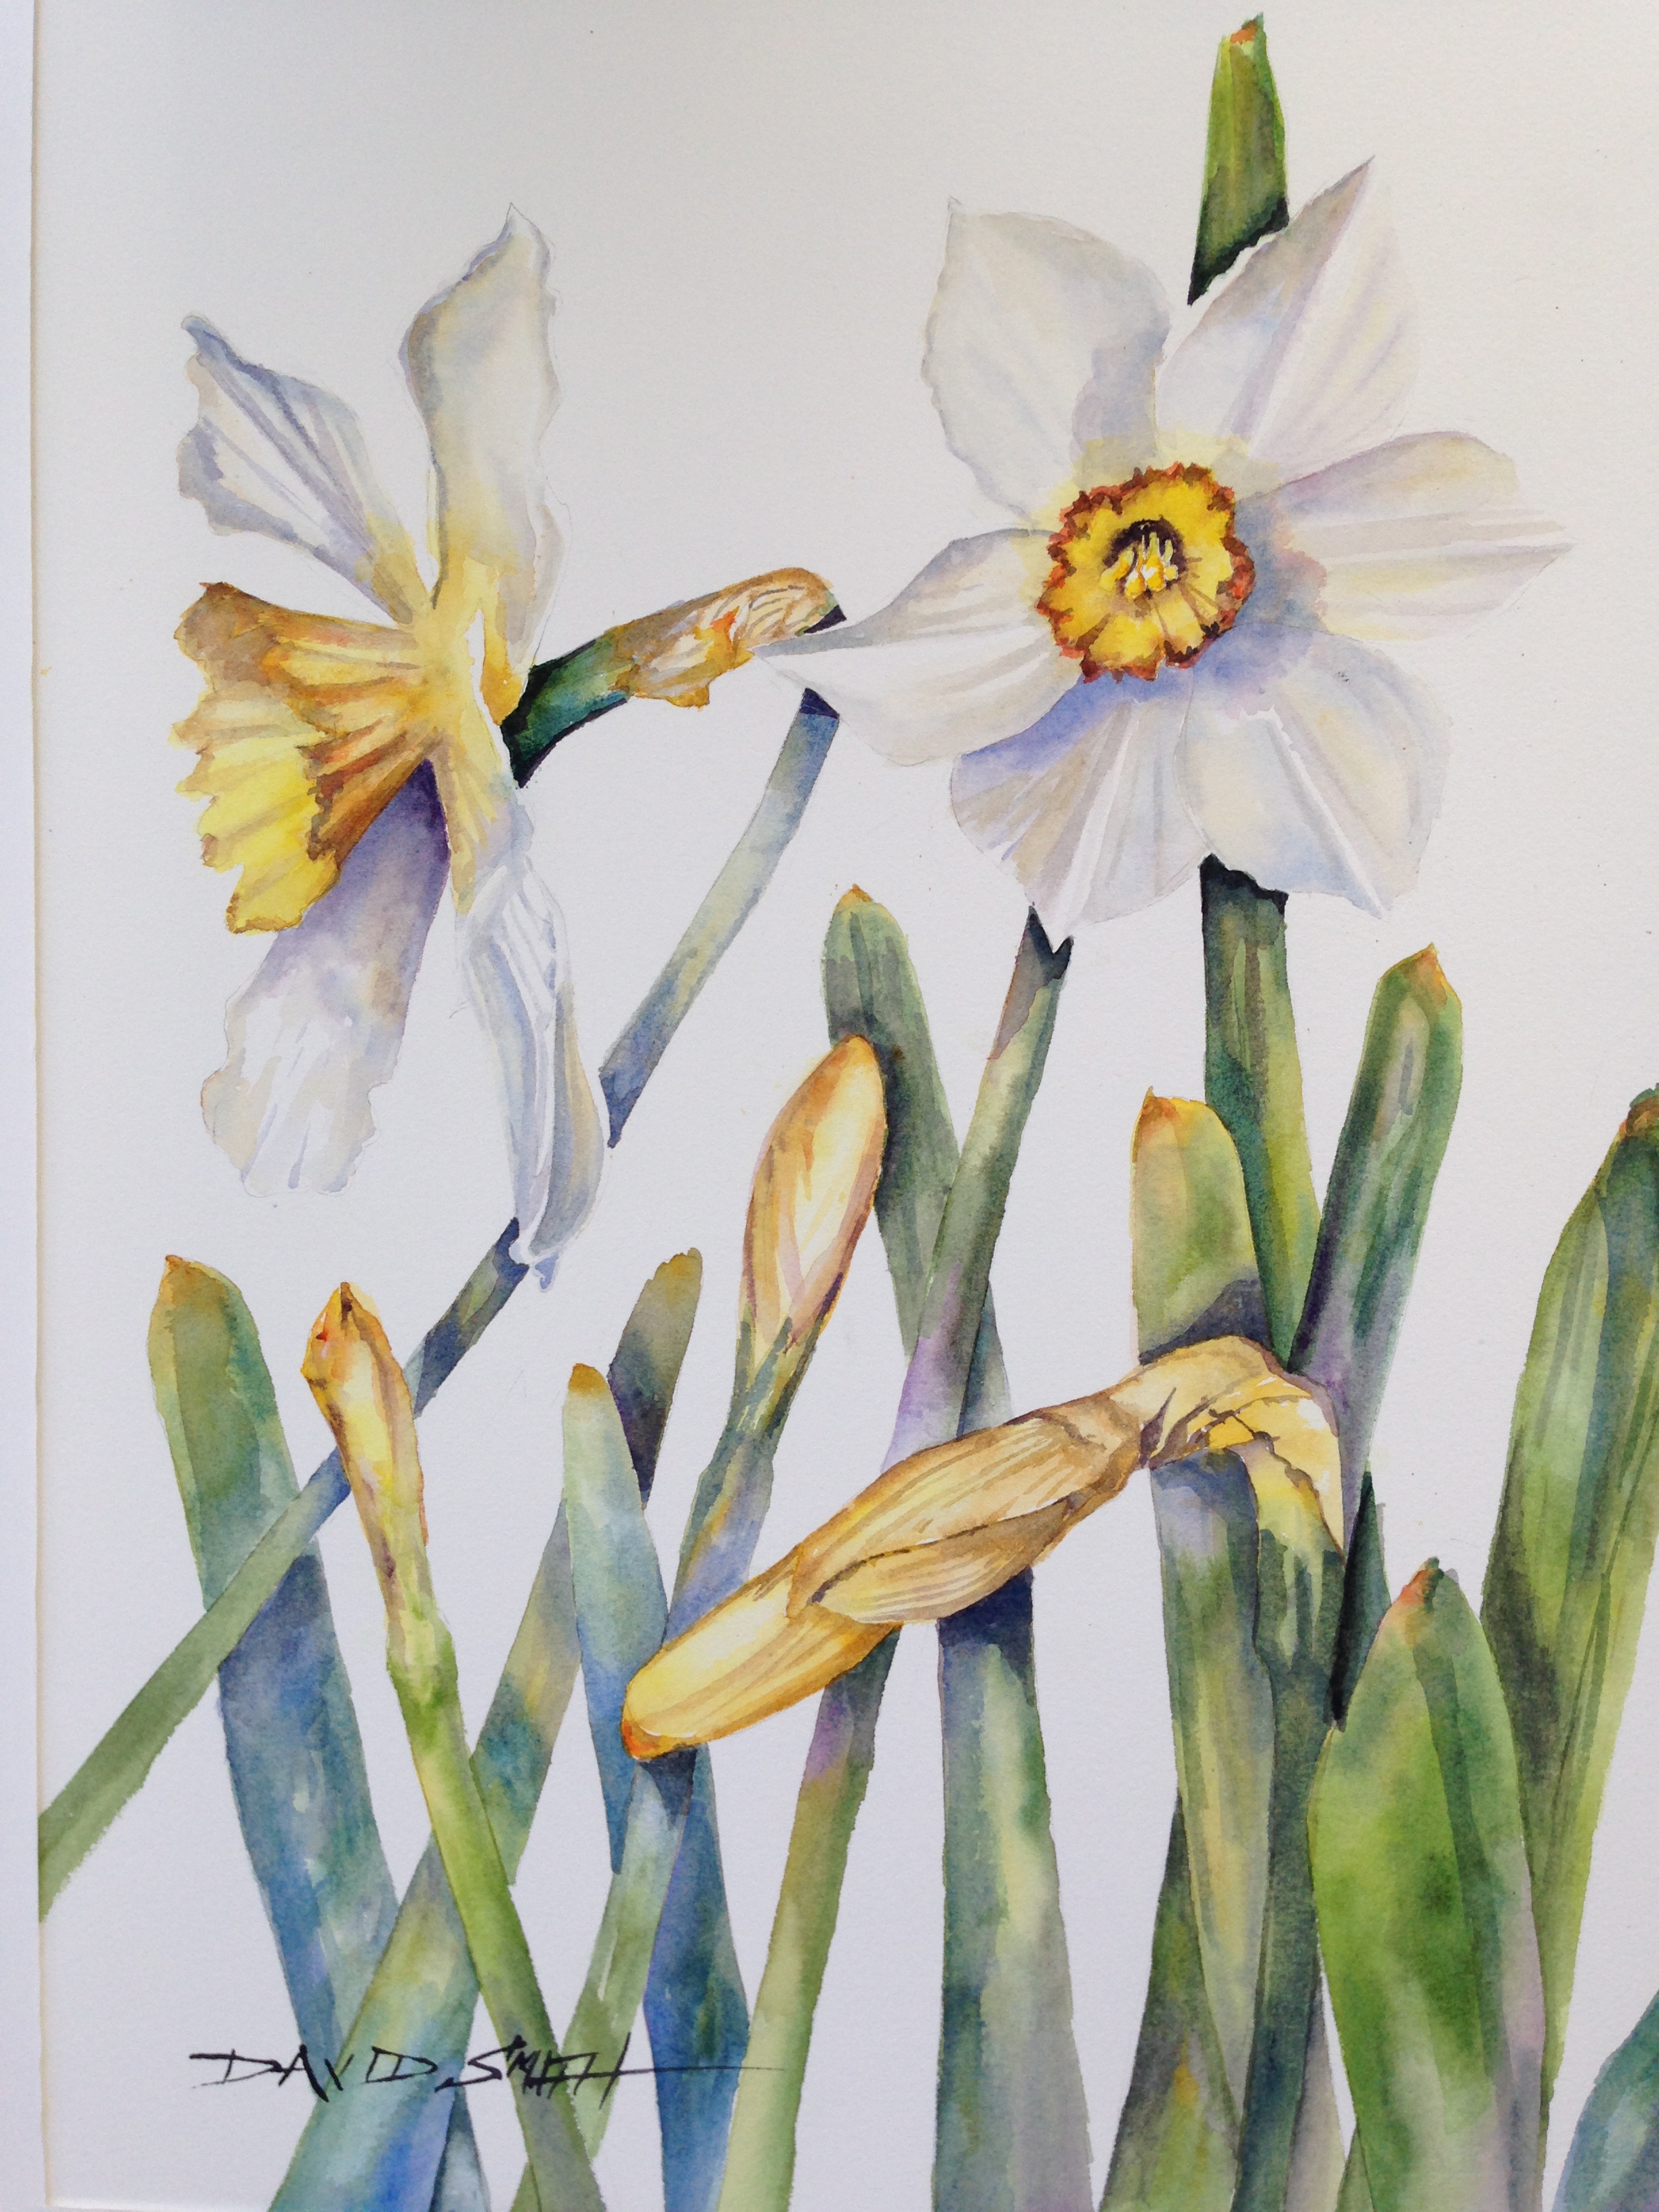 "Daffy" - Sold - Prints Available